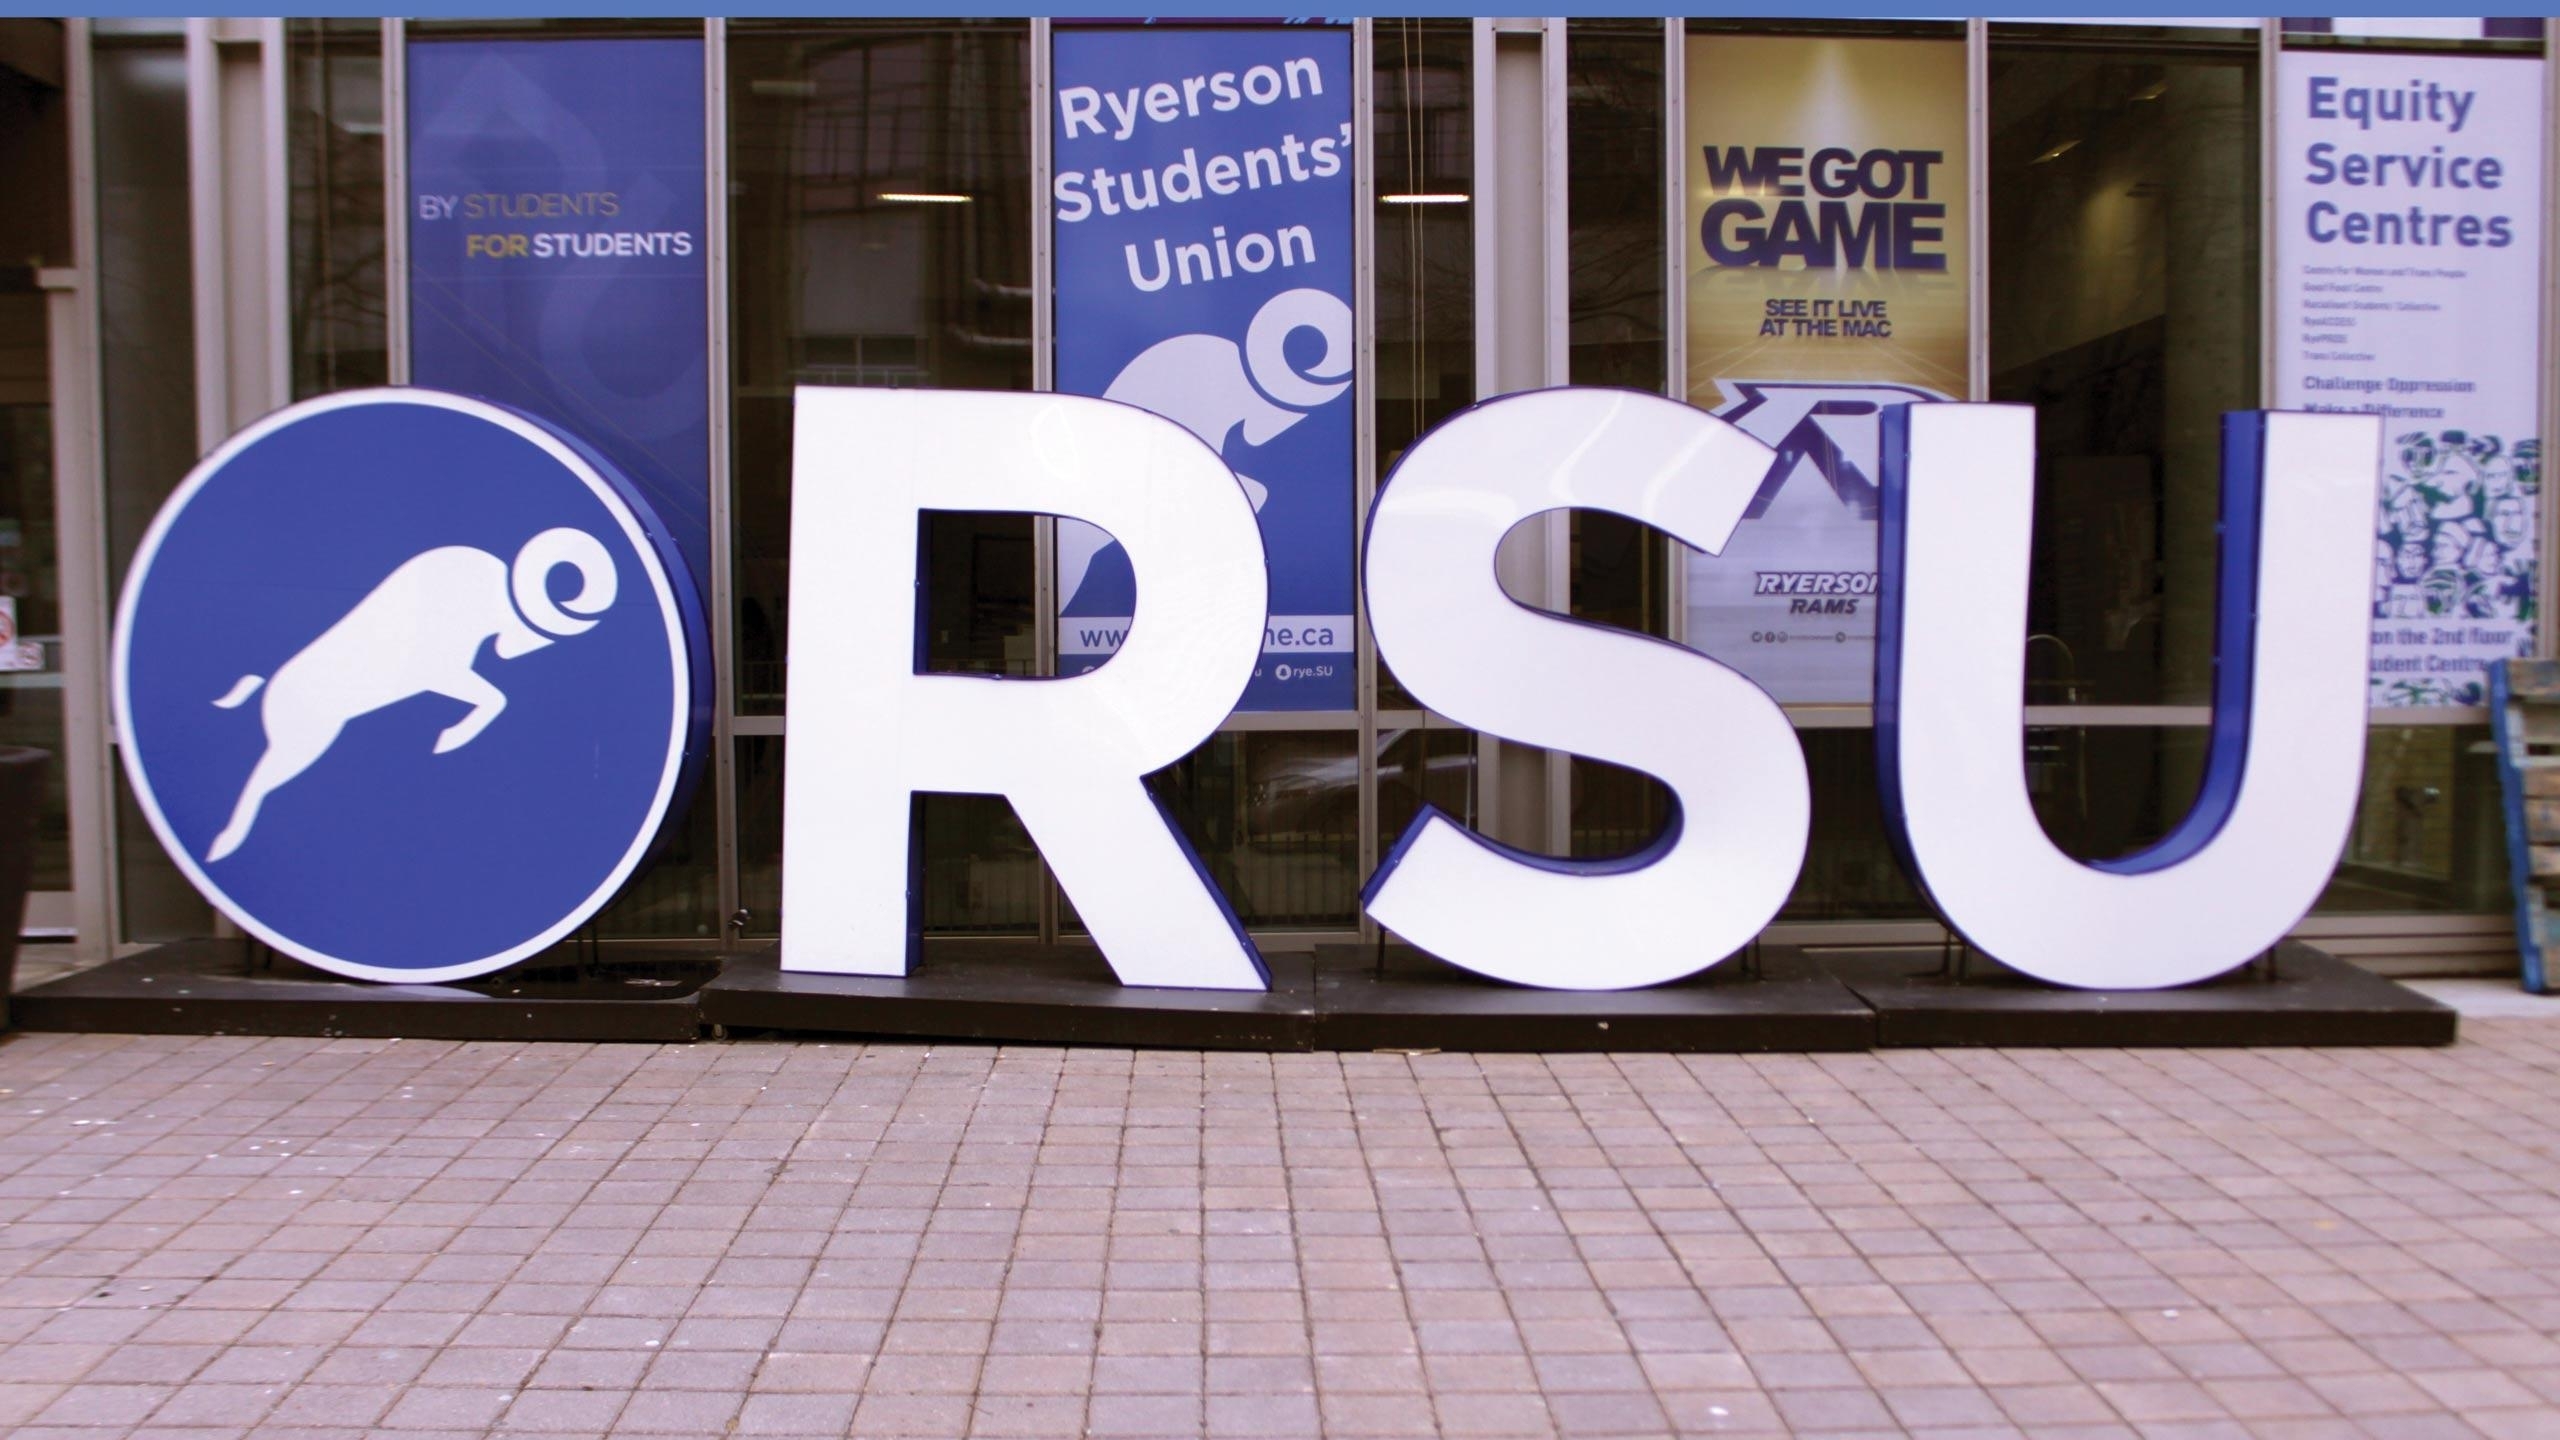 Rsu 2019-20 Candidate Profiles | The Eyeopener intended for When Is Reading Week At Ryerson